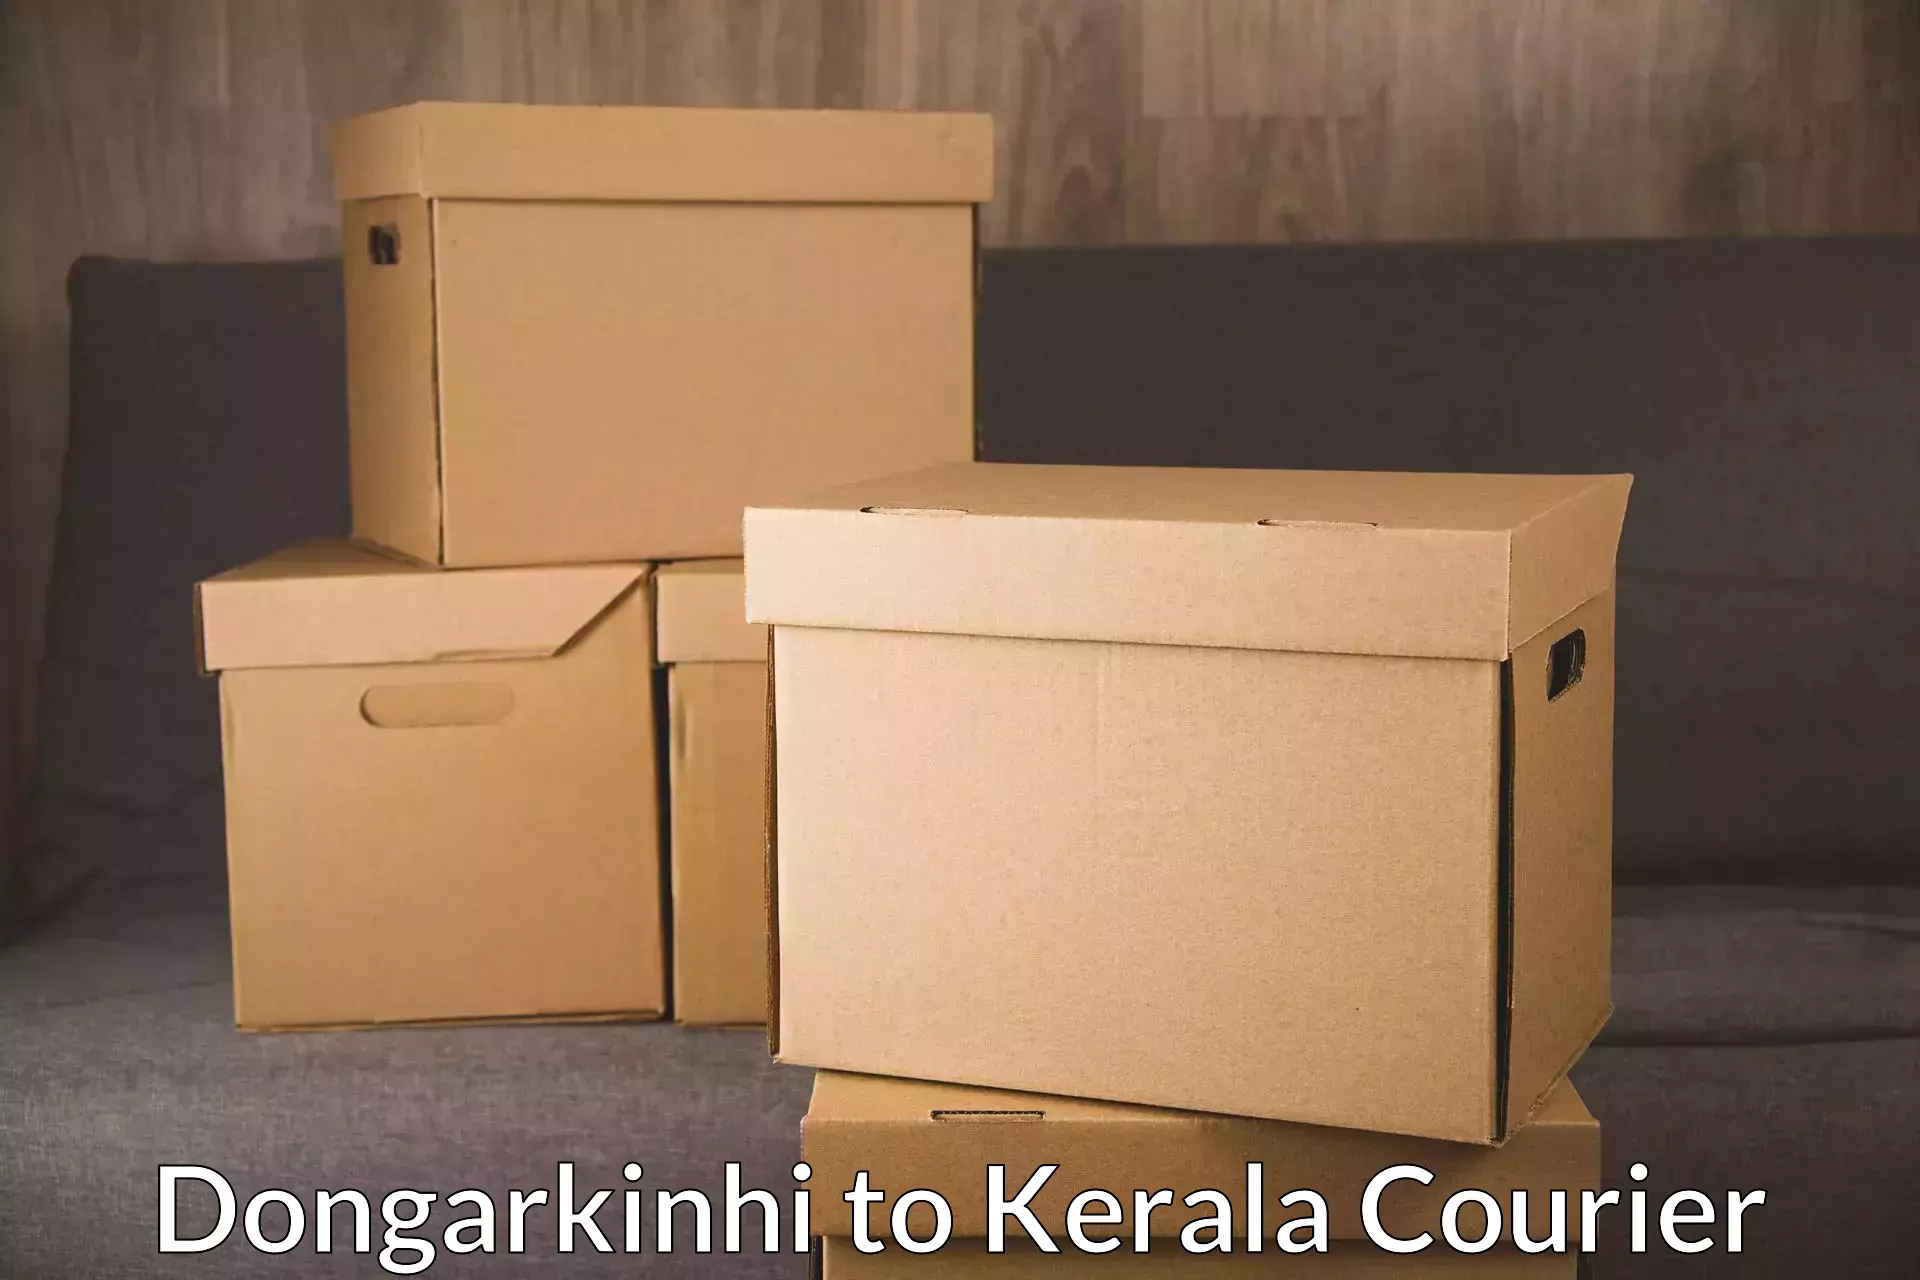 Overnight delivery services Dongarkinhi to Perinthalmanna